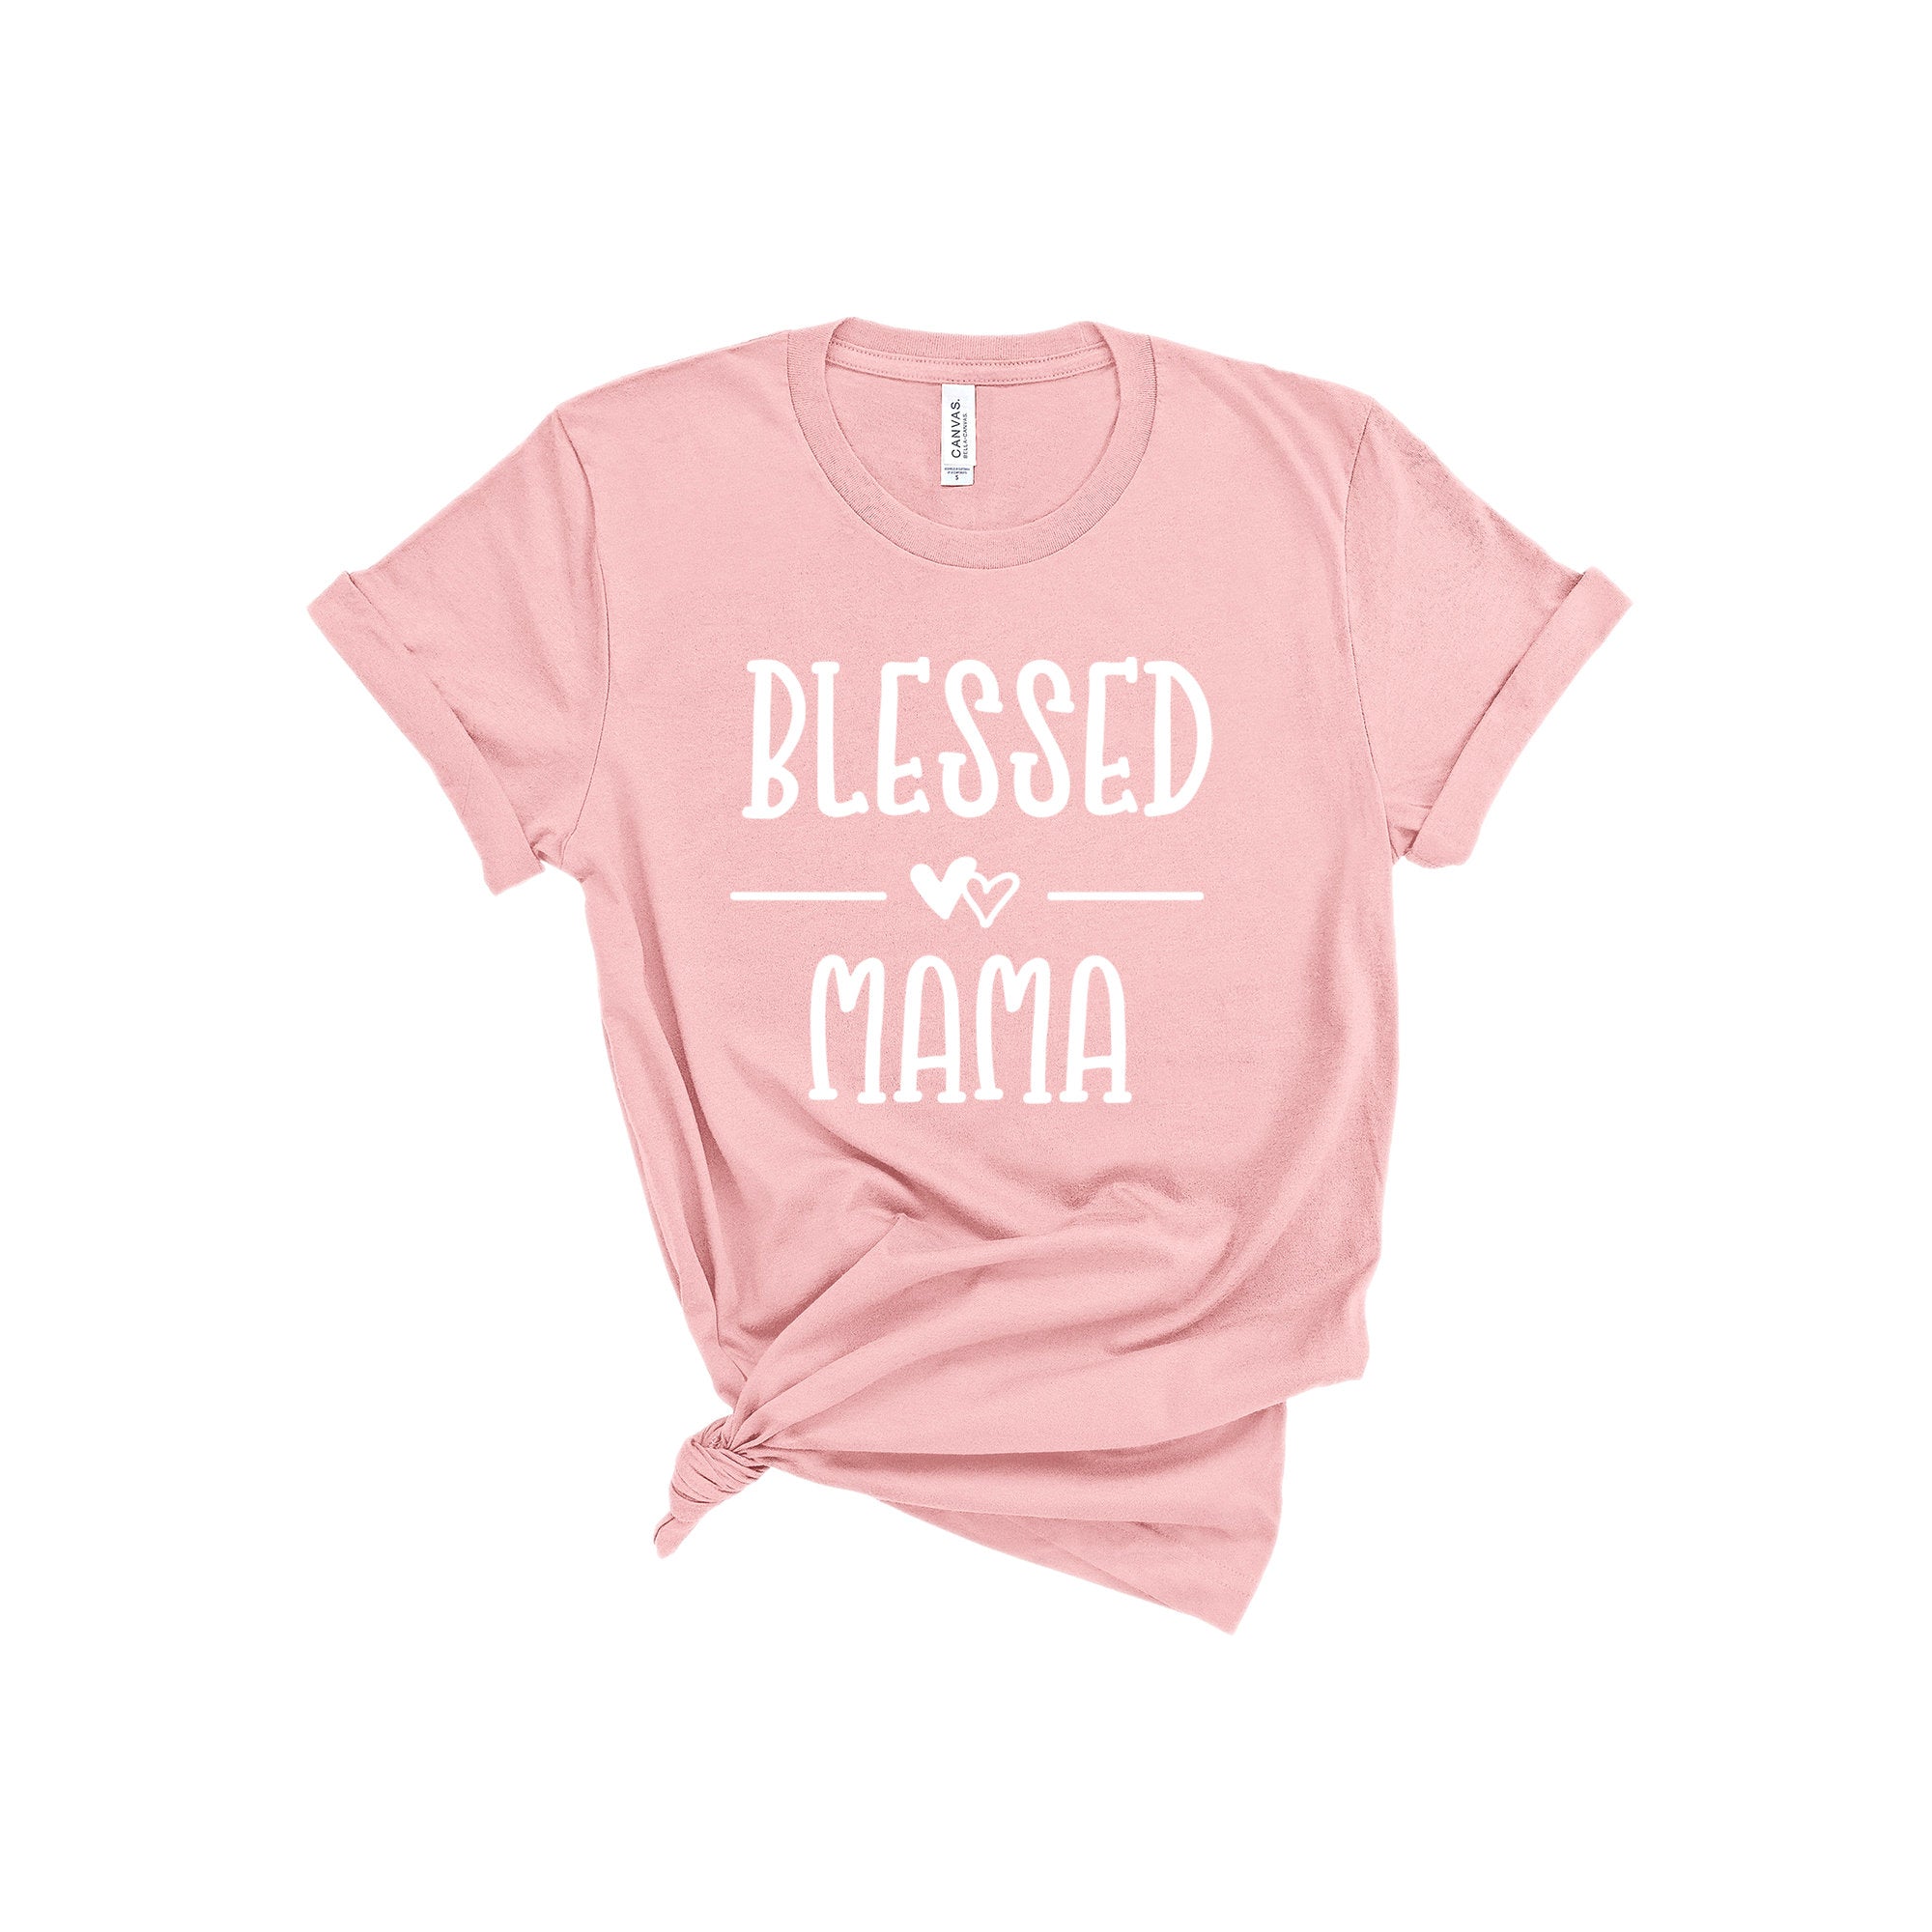 Mother's Day Gifts, Gift for Her, Mom Shirts, Mom-life Shirt, Shirts for Moms, Trendy Mom T-Shirts, Cool Mom Shirts, Shirts for Moms